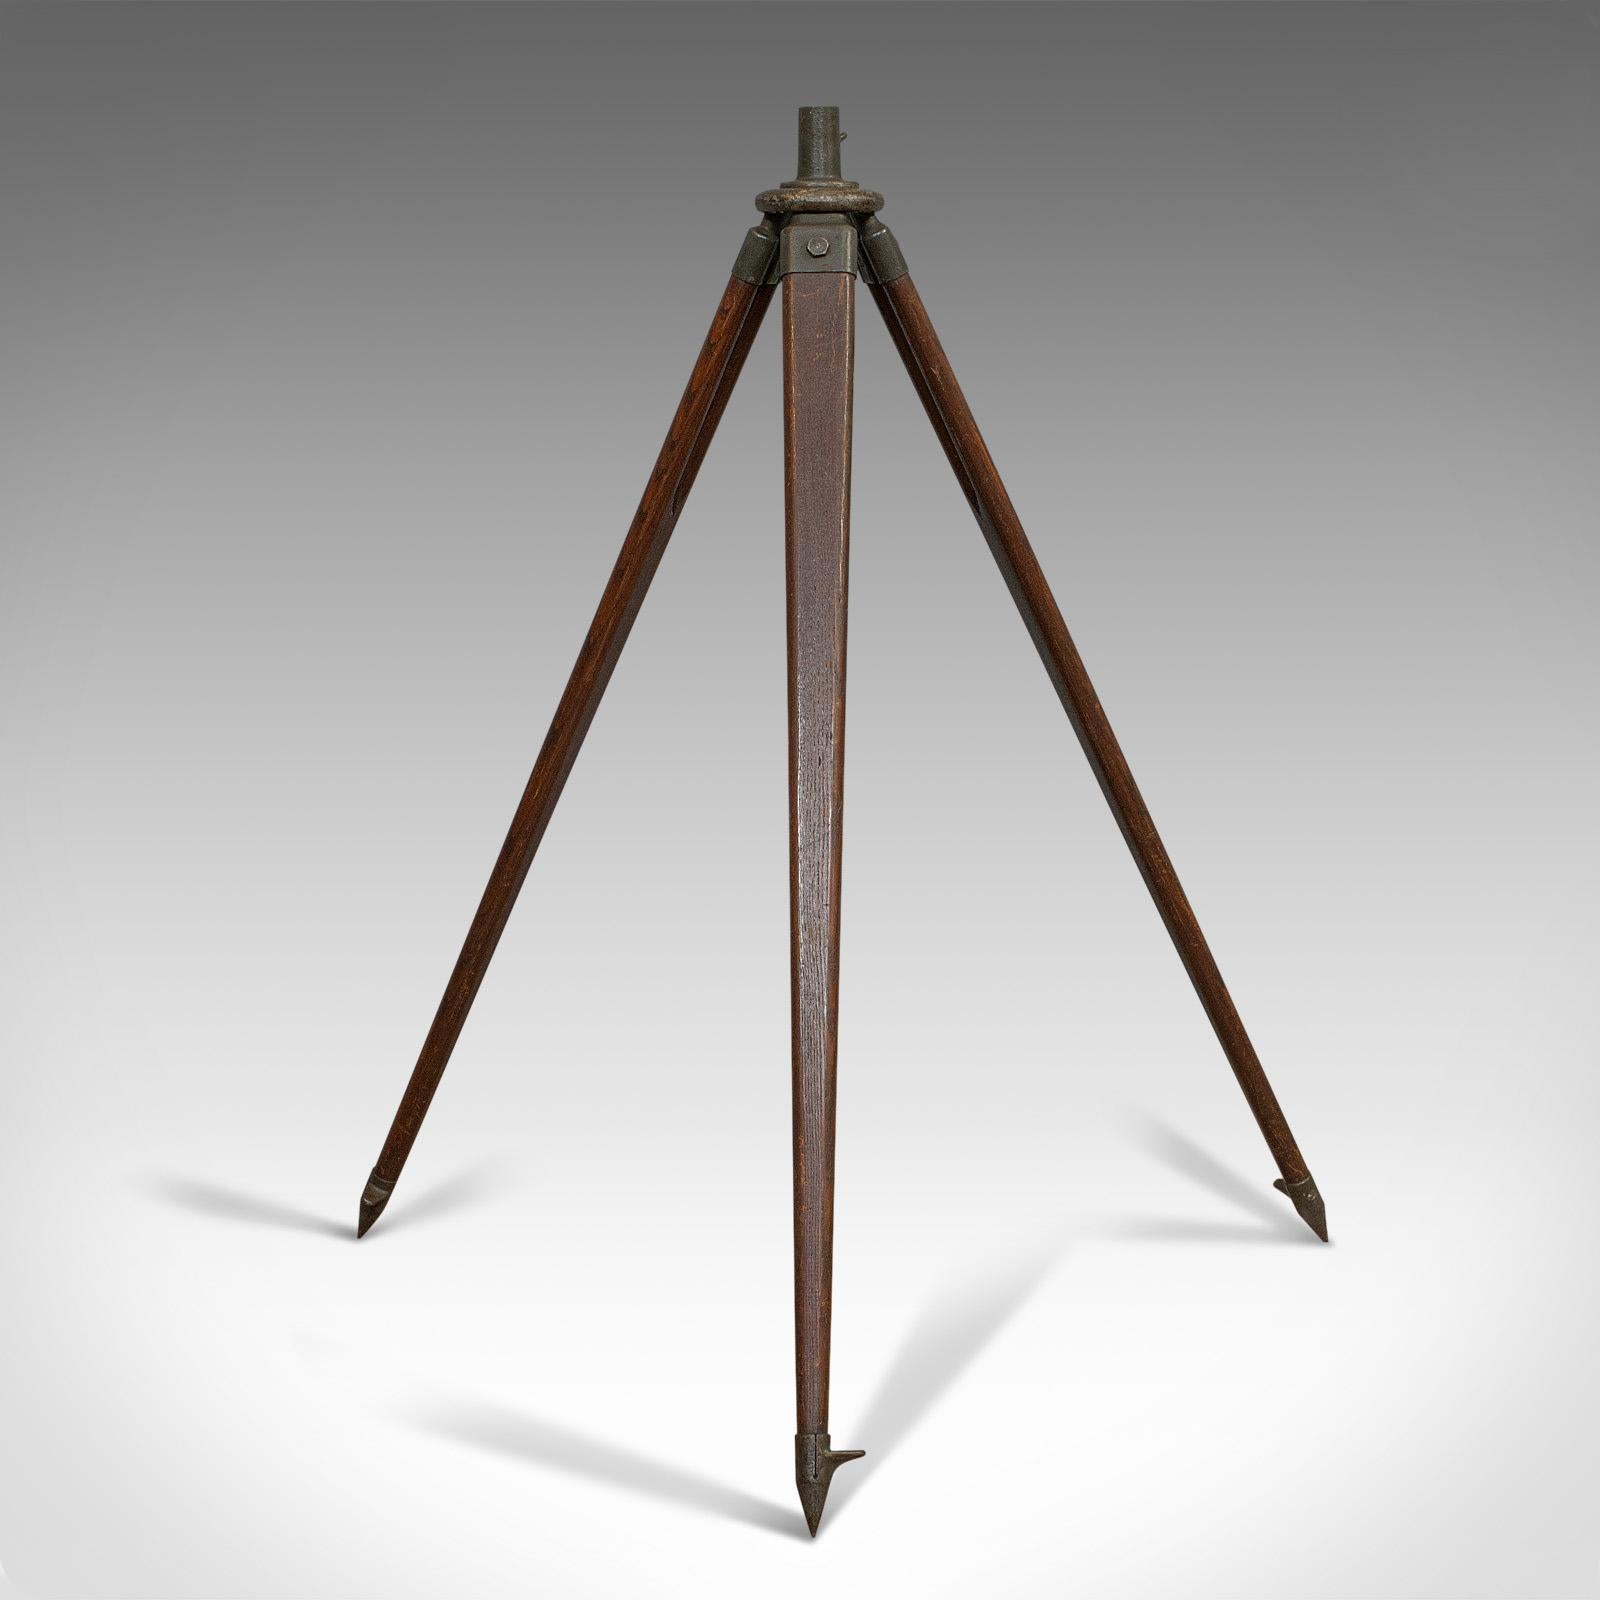 This is a vintage telescope tripod. An English, oak and bronze support Stand, dating to the mid-20th century, circa 1940.

Displays a desirable aged patina
Select oak in good original order
Bronze ferrule atop a cast alloy mount
Socket mount